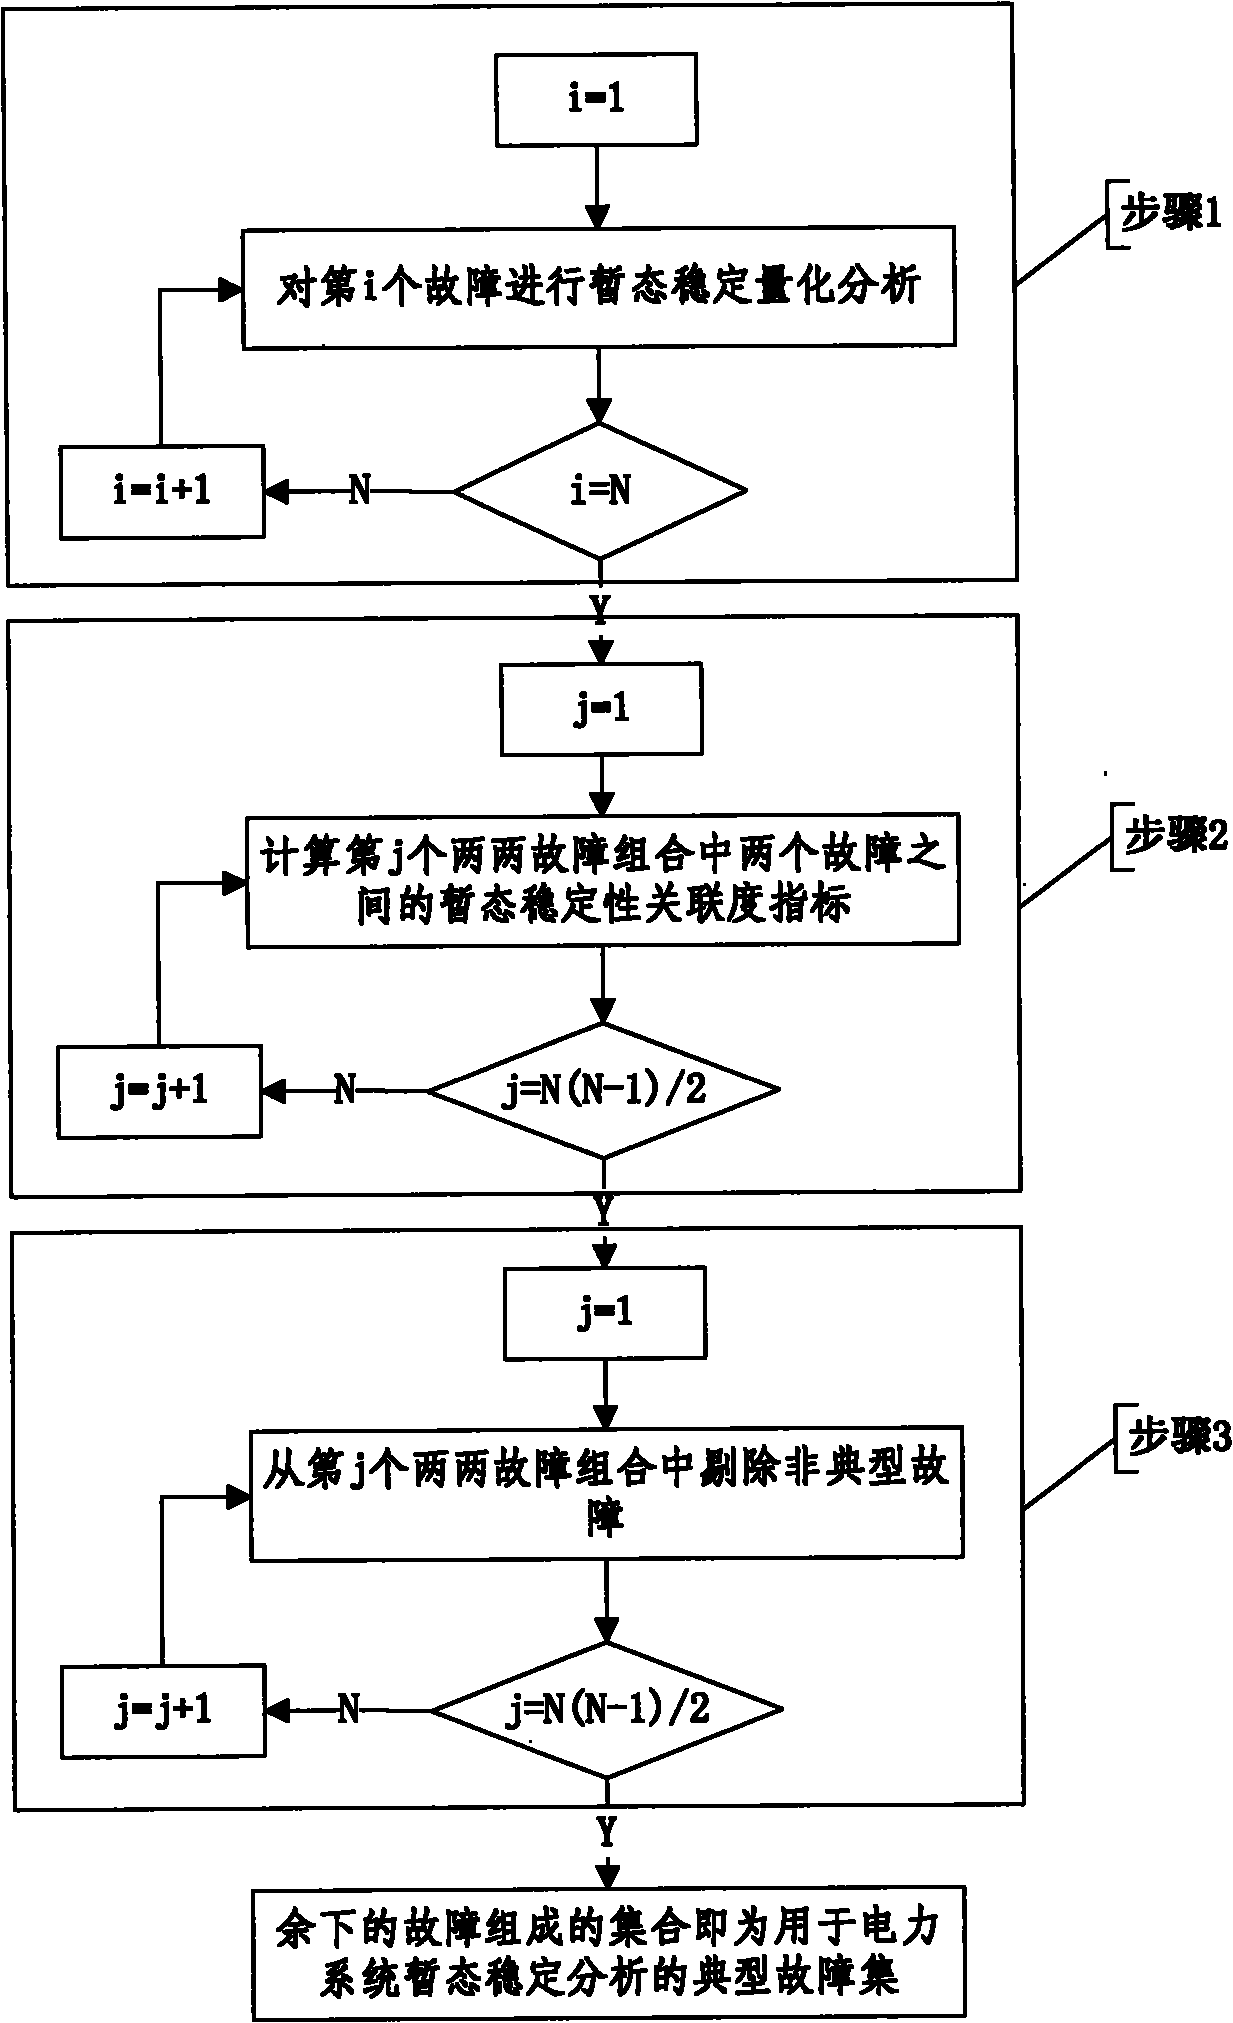 Typical fault set identification method for transient stability analysis of power system